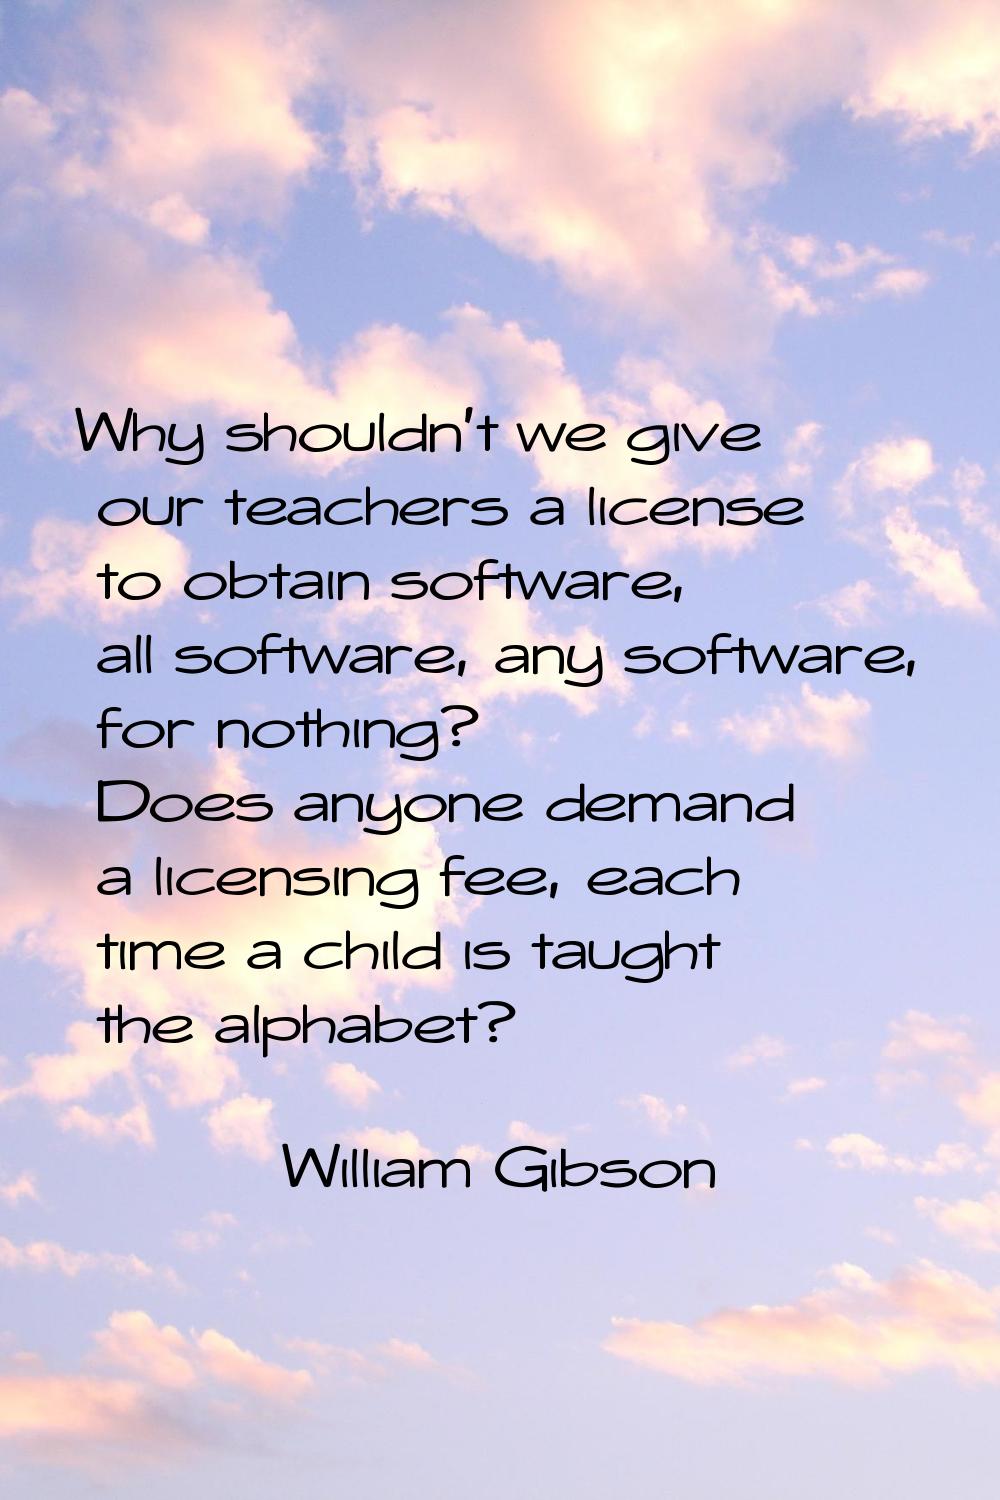 Why shouldn't we give our teachers a license to obtain software, all software, any software, for no